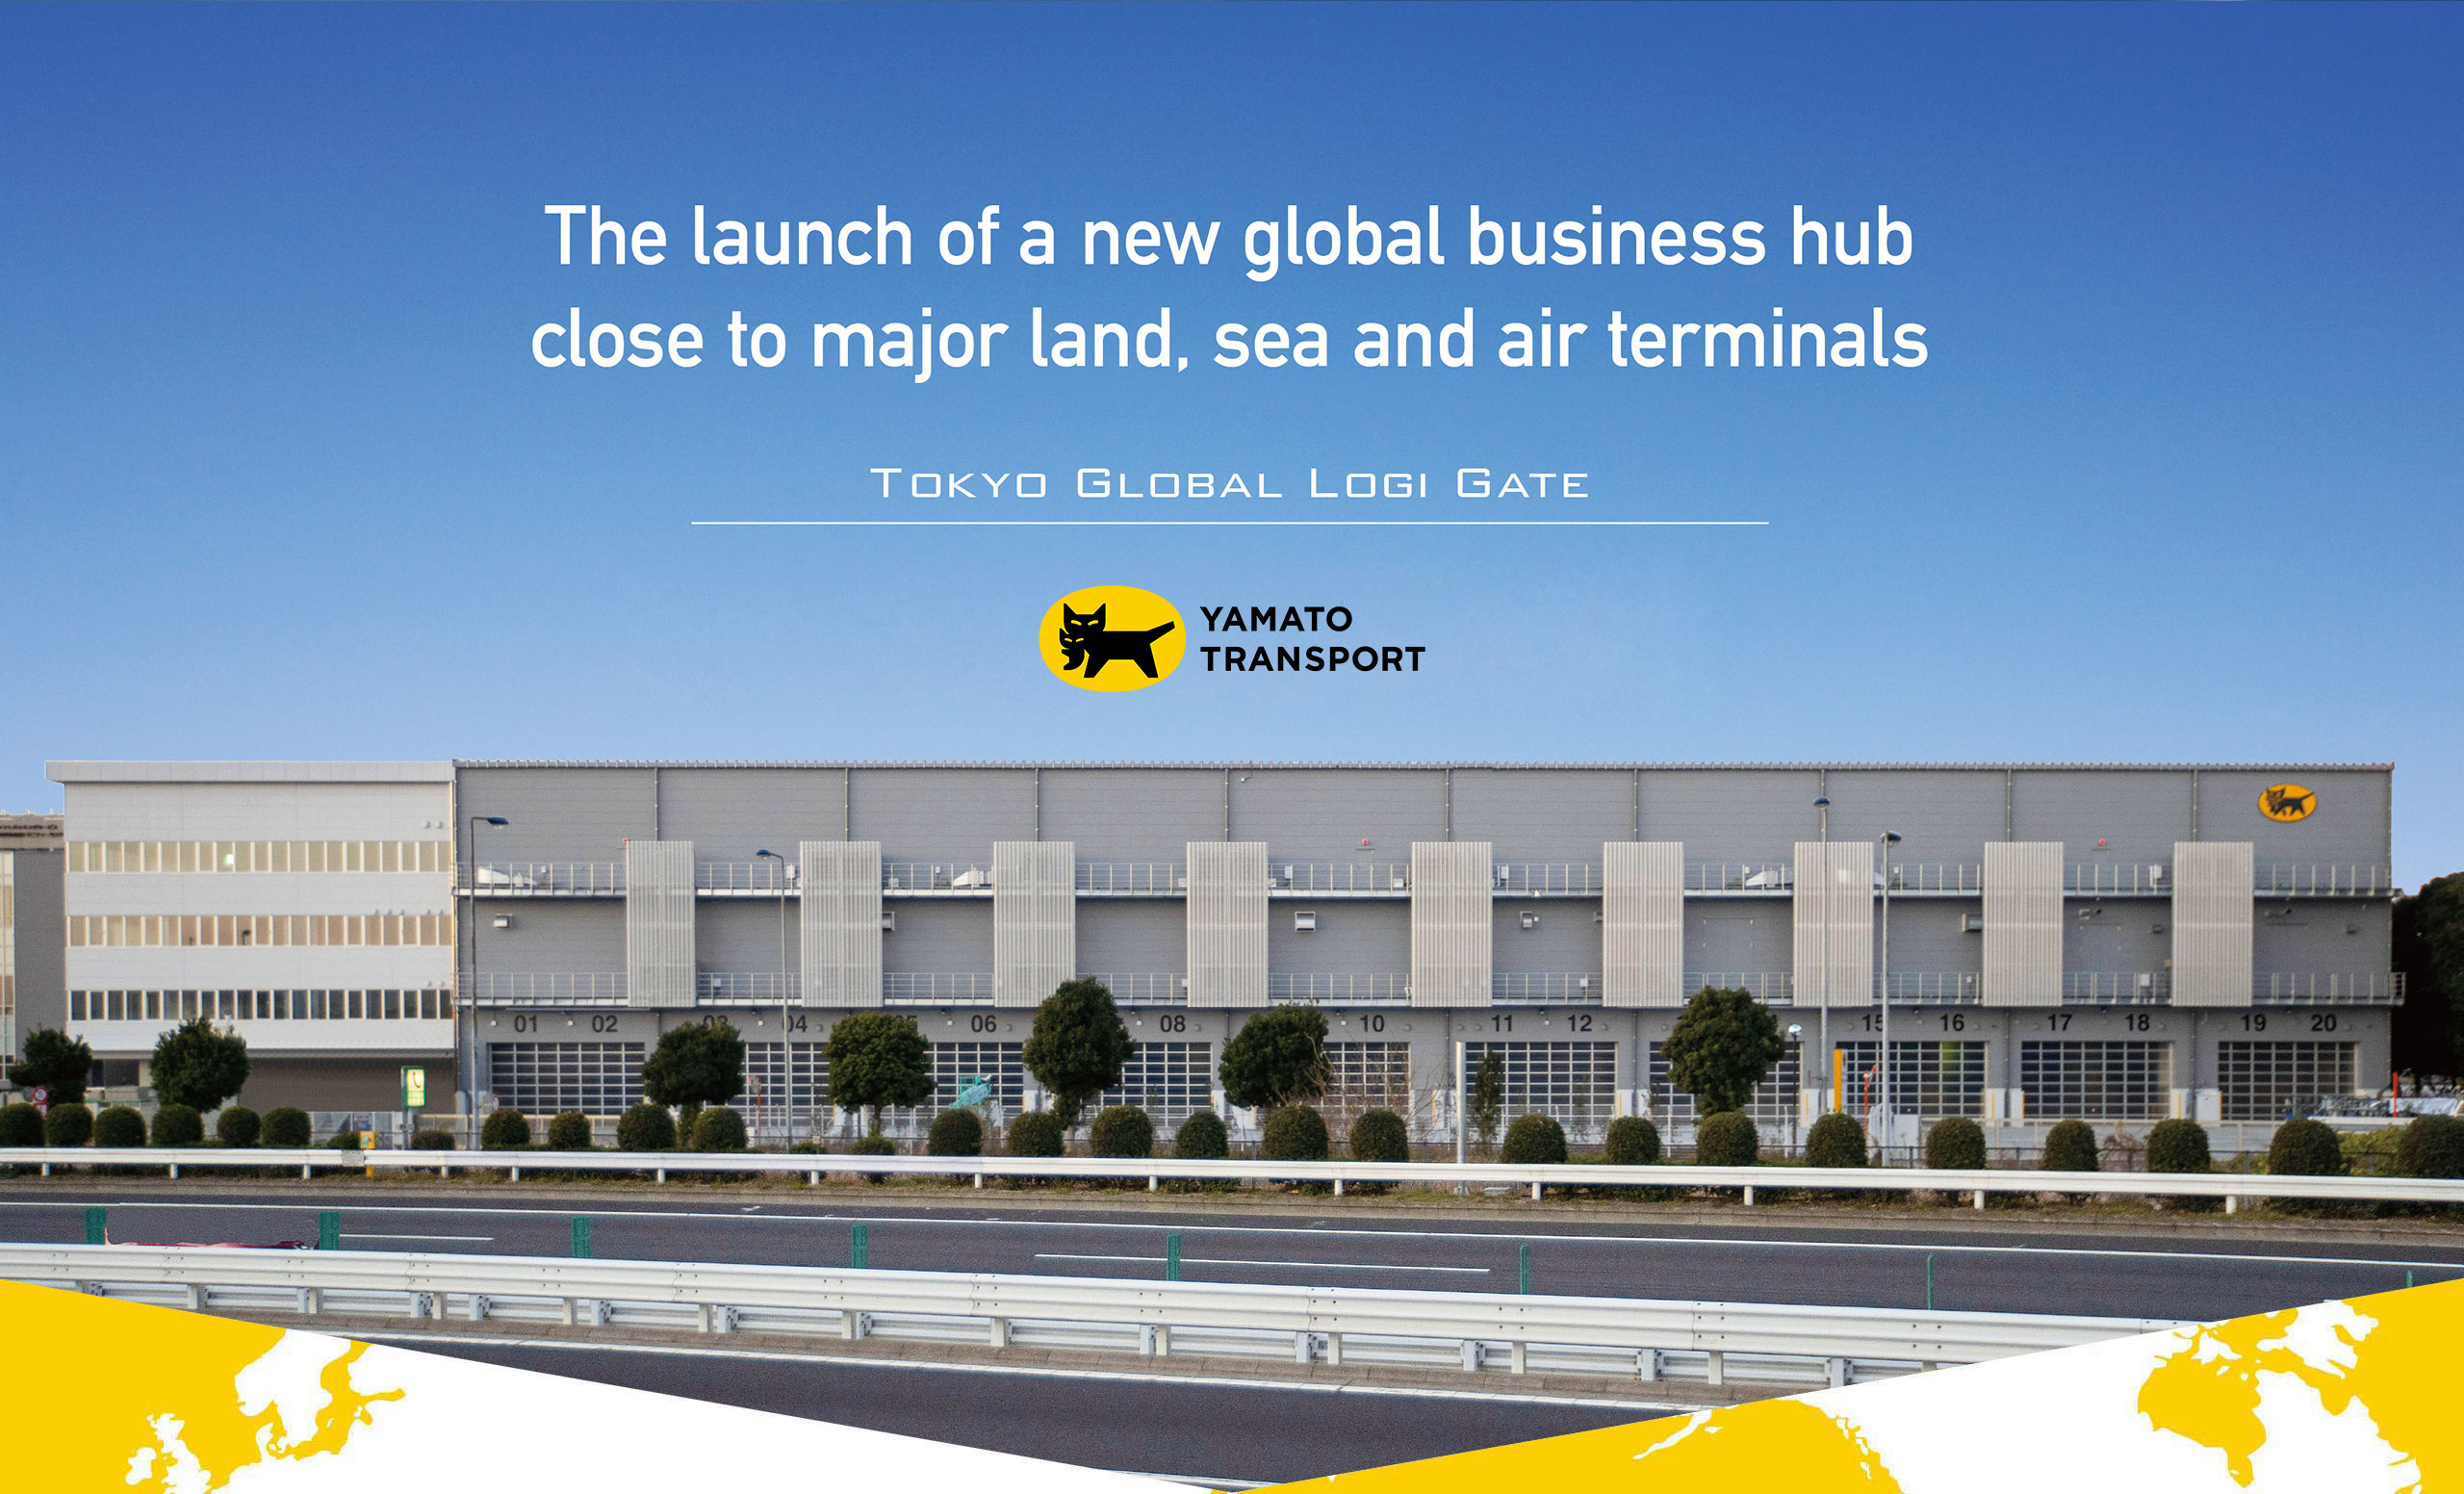 The launch of a new global business hub close to major land, sea, and air terminals.